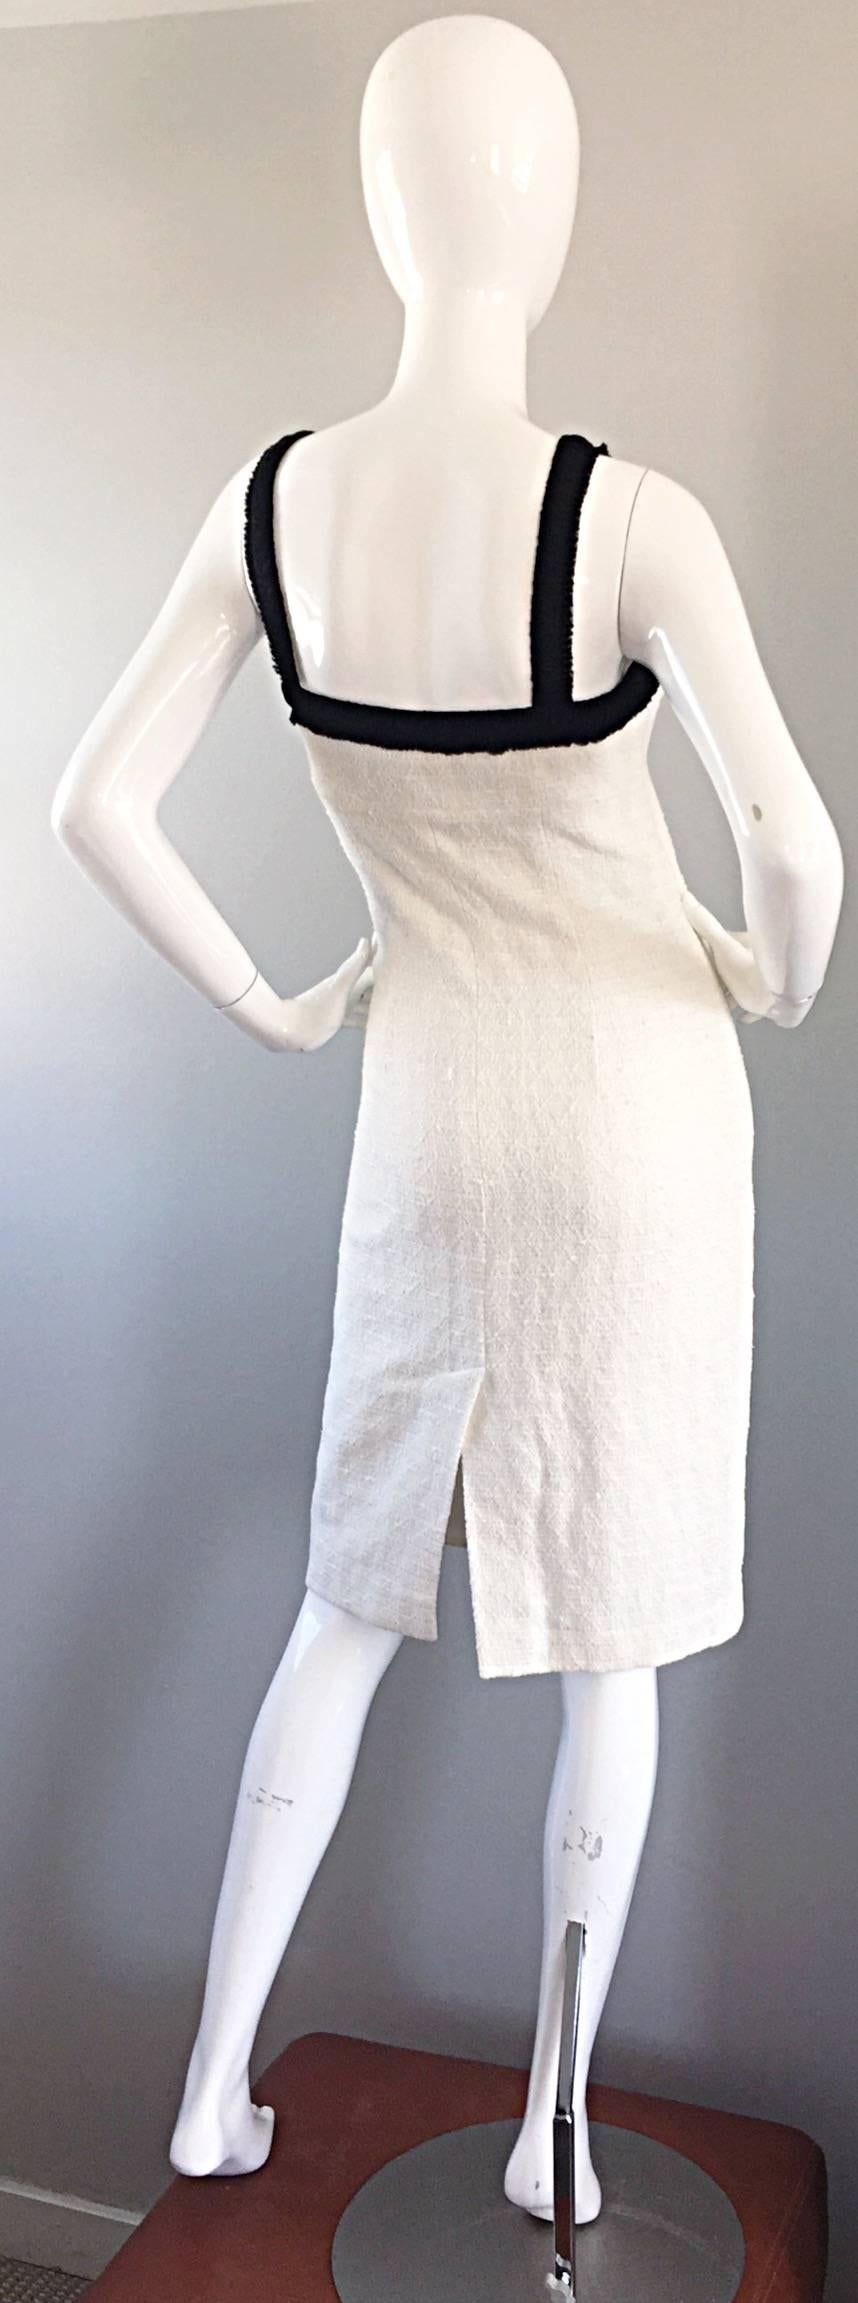 Michael Kors Collection Size 4 White and Black Textured Cotton + Silk Dress In Excellent Condition For Sale In San Diego, CA